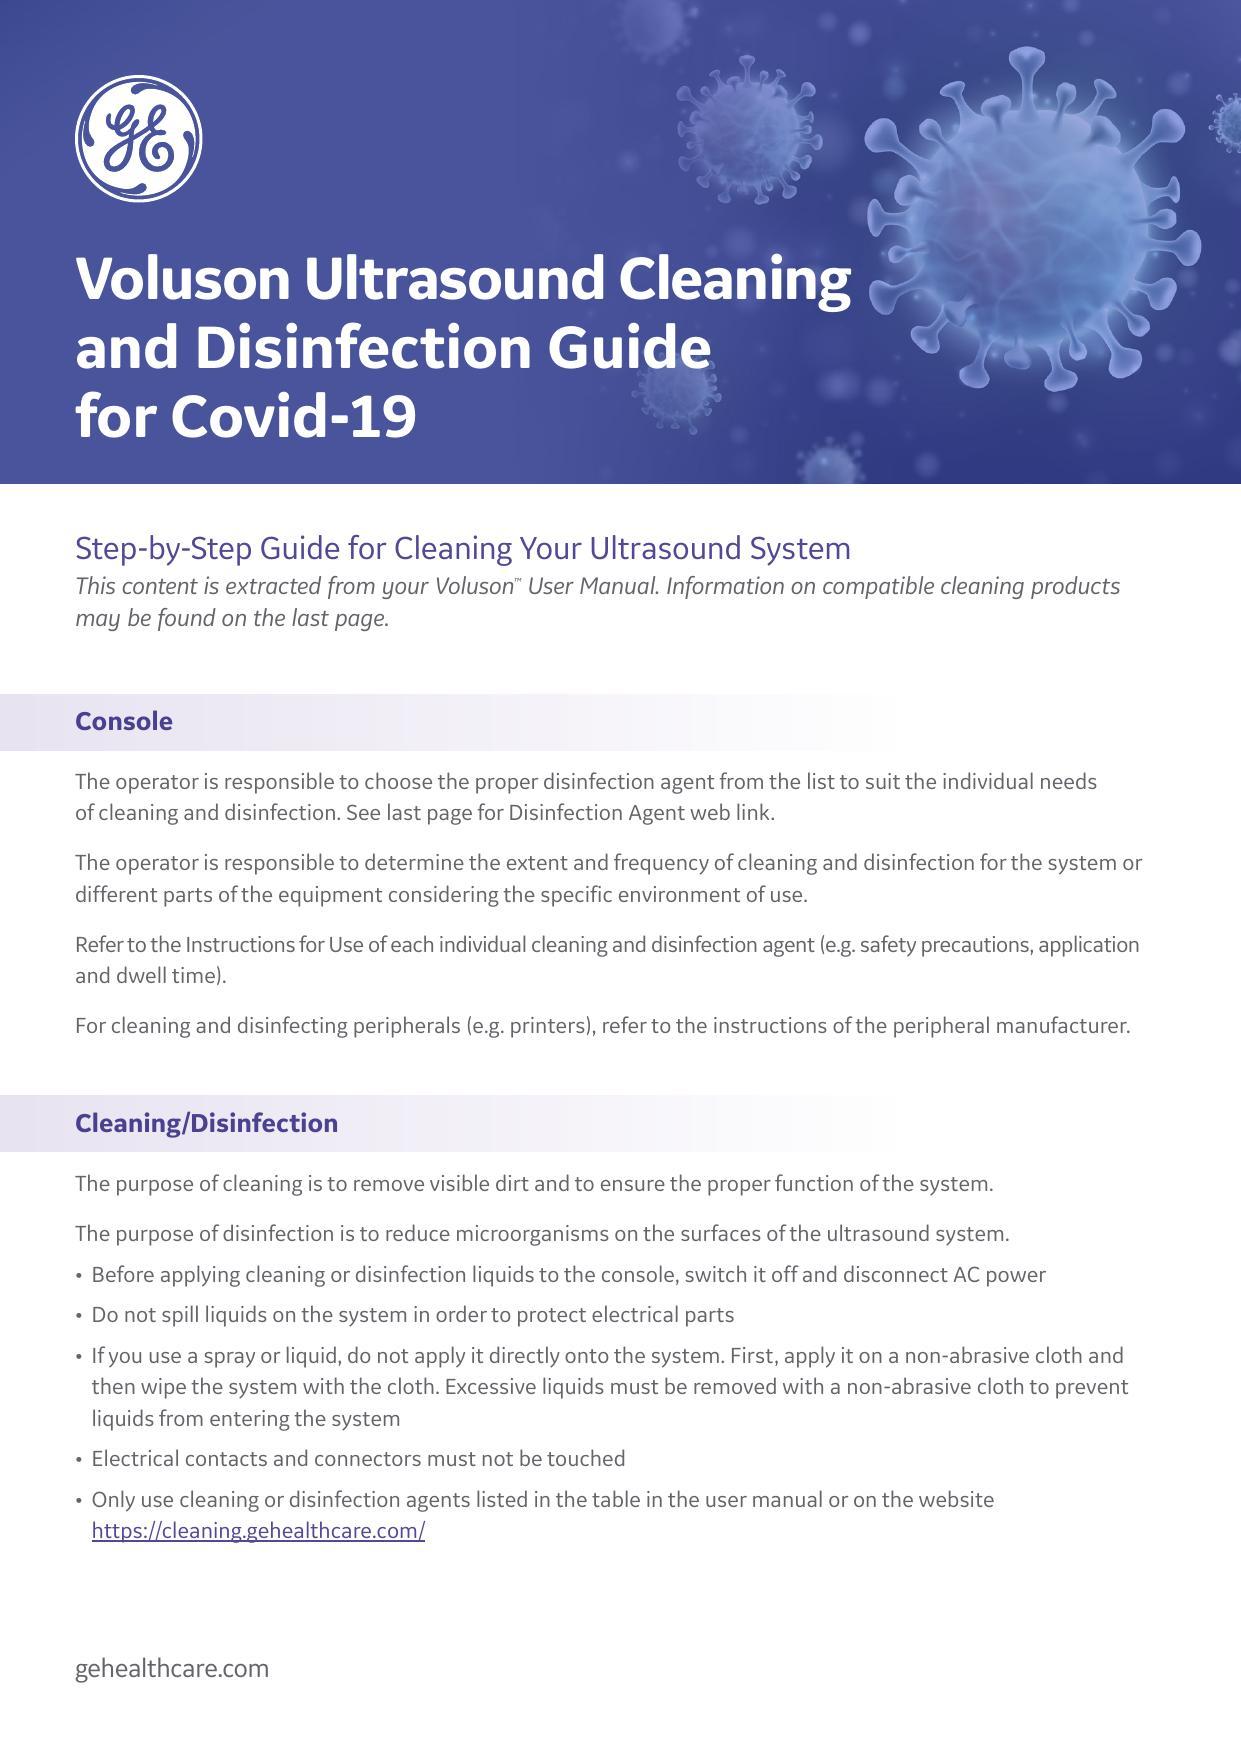 ge-healthcare-voluson-ultrasound-cleaning-and-disinfection-guide-for-covid-19.pdf